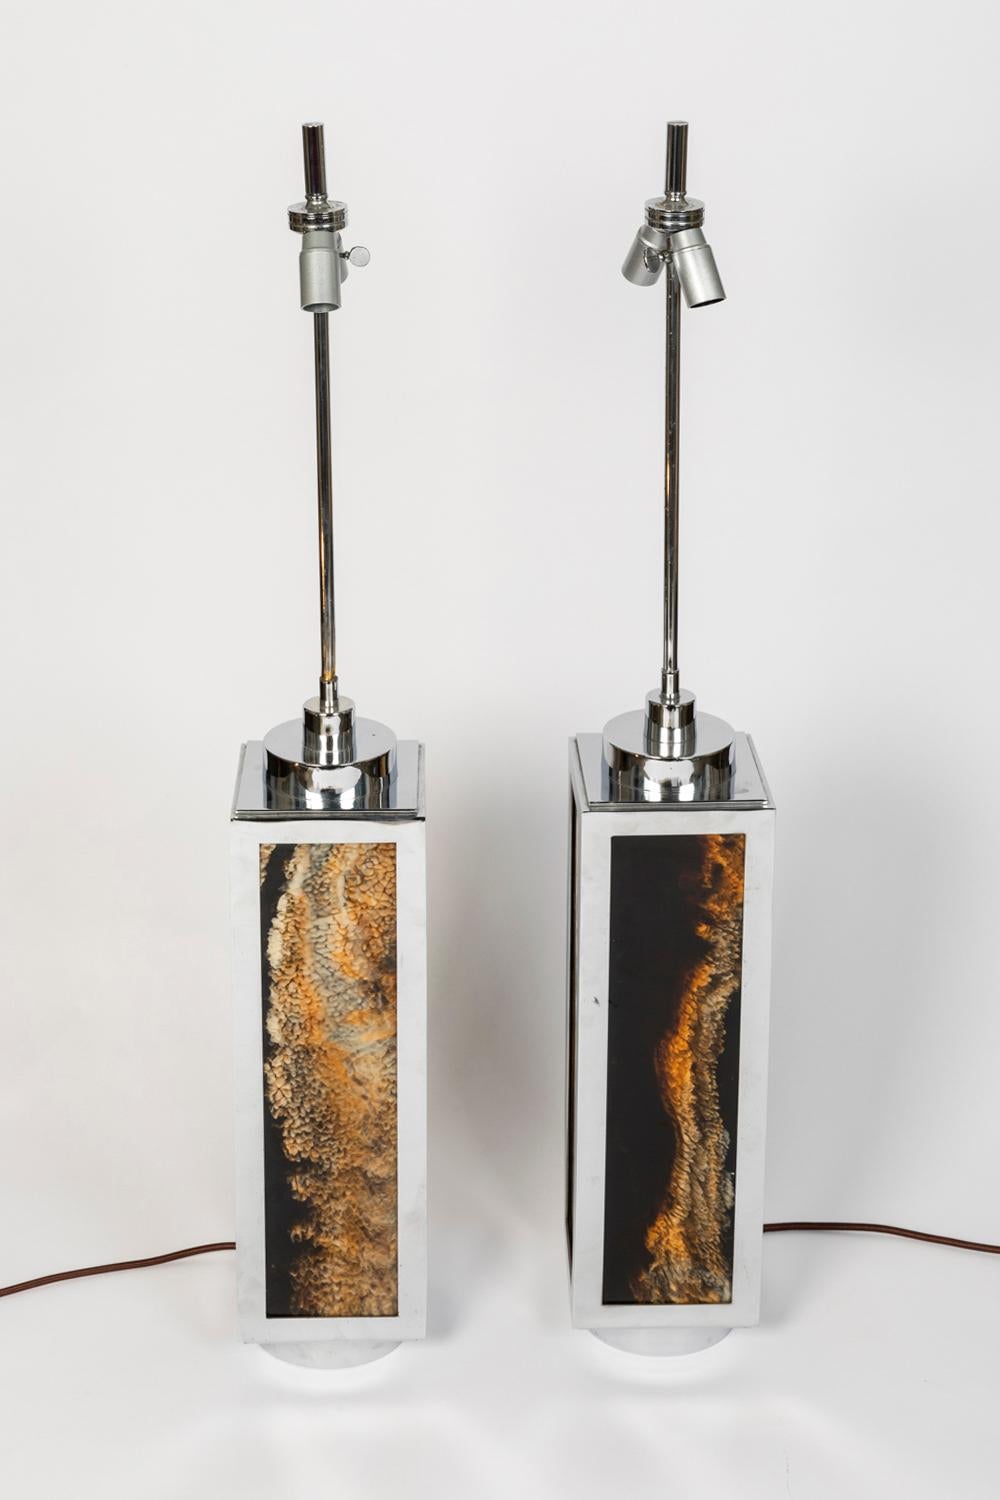 Pair of square shape lamps in Bakelite with a mineral motif in black, brown, yellow and beige tones surrounded by chromed metal. They stand on a chromed metal circular base.

Work realized in the 1970s.

New and functional electrical